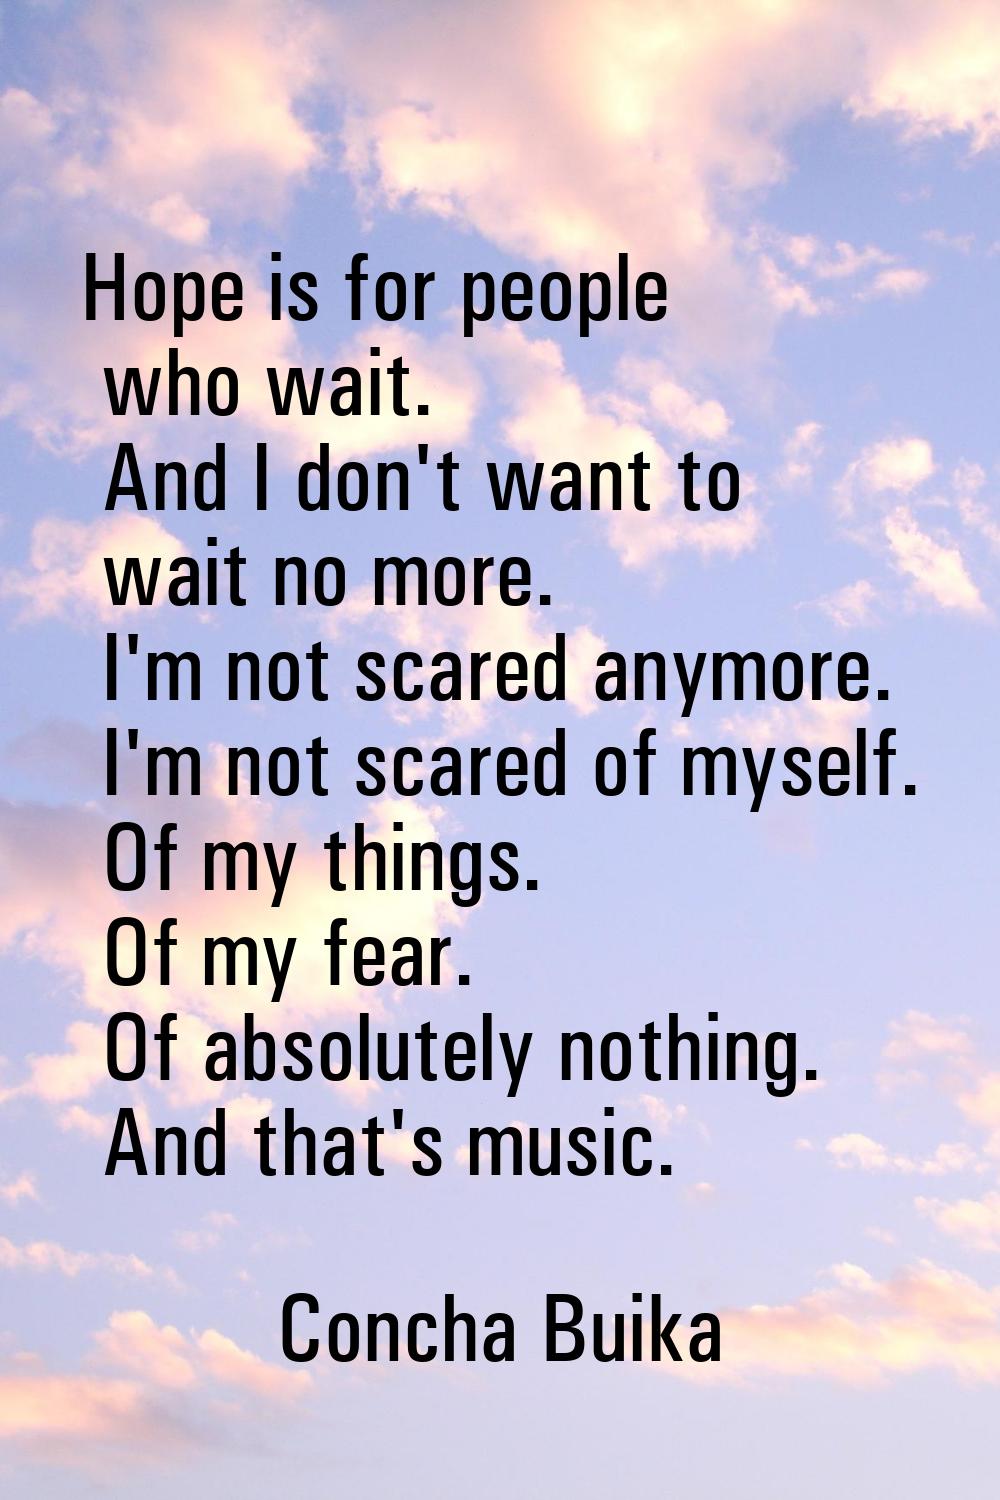 Hope is for people who wait. And I don't want to wait no more. I'm not scared anymore. I'm not scar